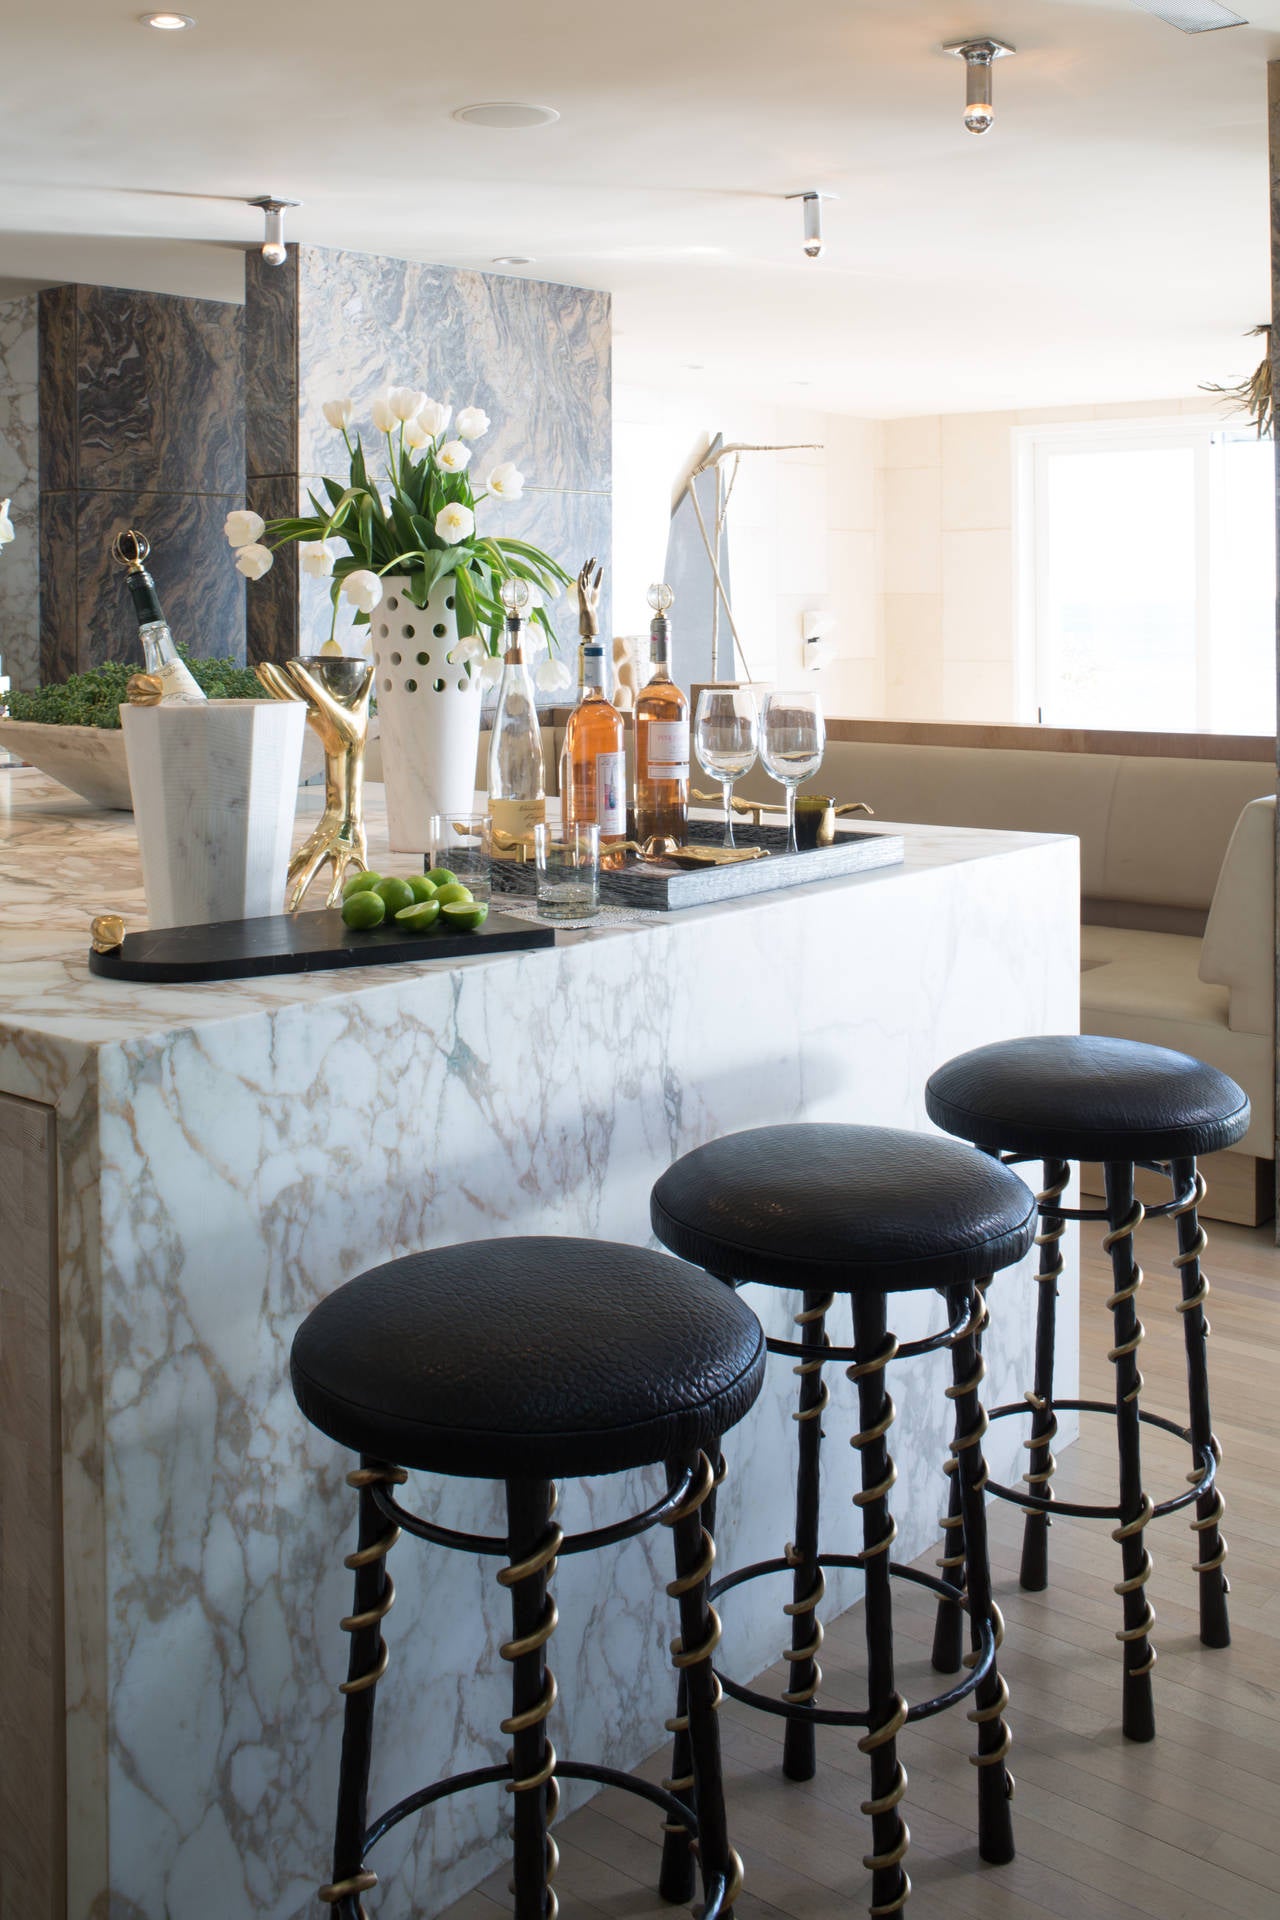 American Liaison Champagne Bucket in Negro Marquina Marble